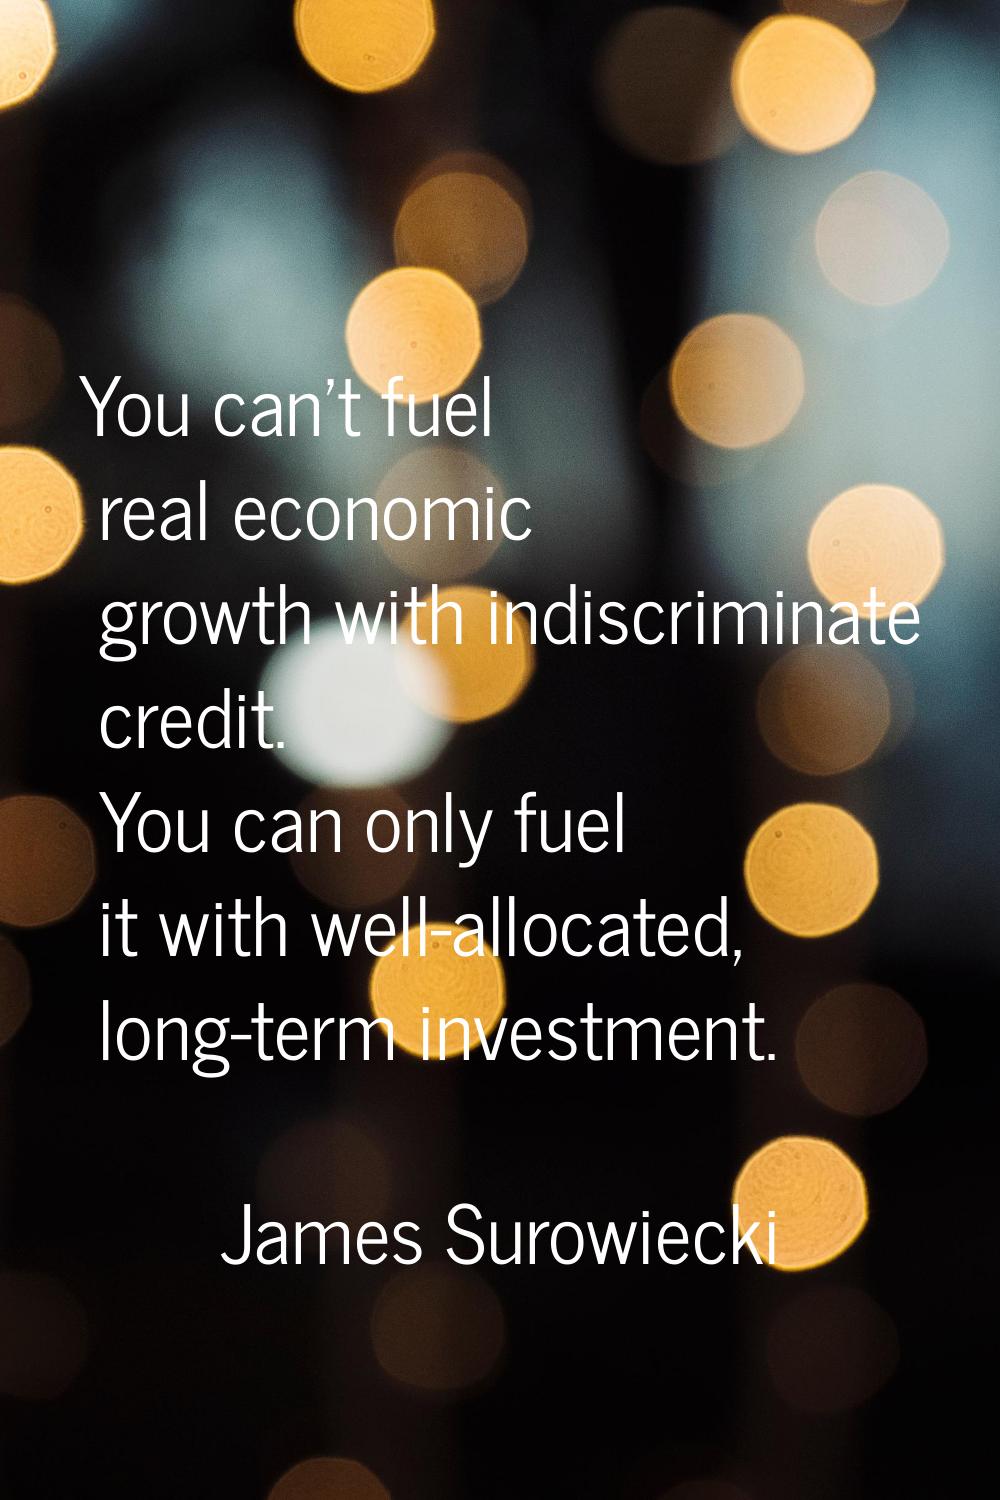 You can't fuel real economic growth with indiscriminate credit. You can only fuel it with well-allo